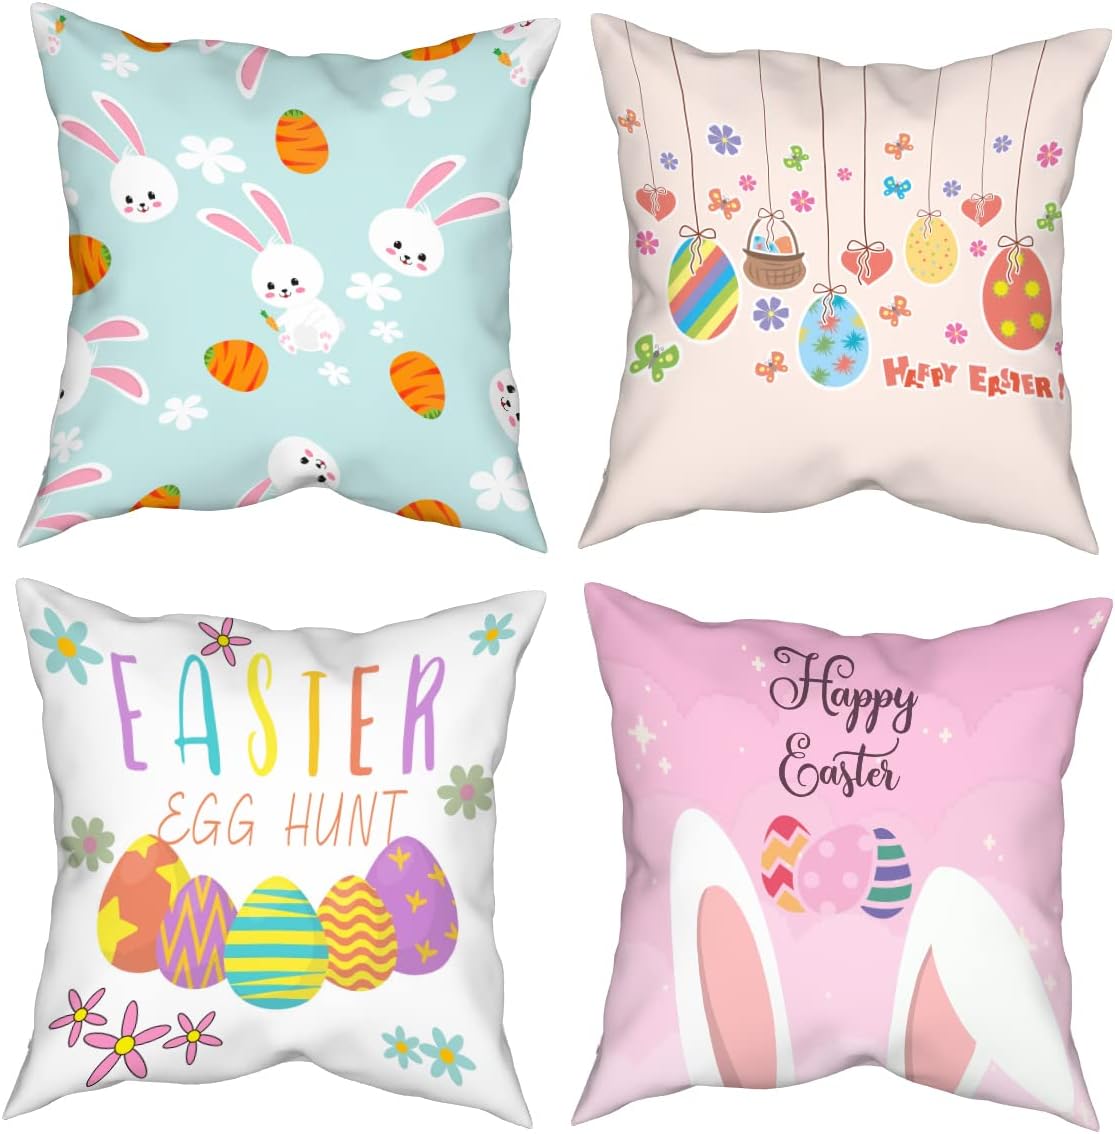 Easter Throw Pillow Covers Cartoon Easter Bunny Eggs Decorative Pillowcase Cotton Pillow Cushion Case for Living Room Sofa Couch 18x18 Inch Set of 4, White Blue Pink